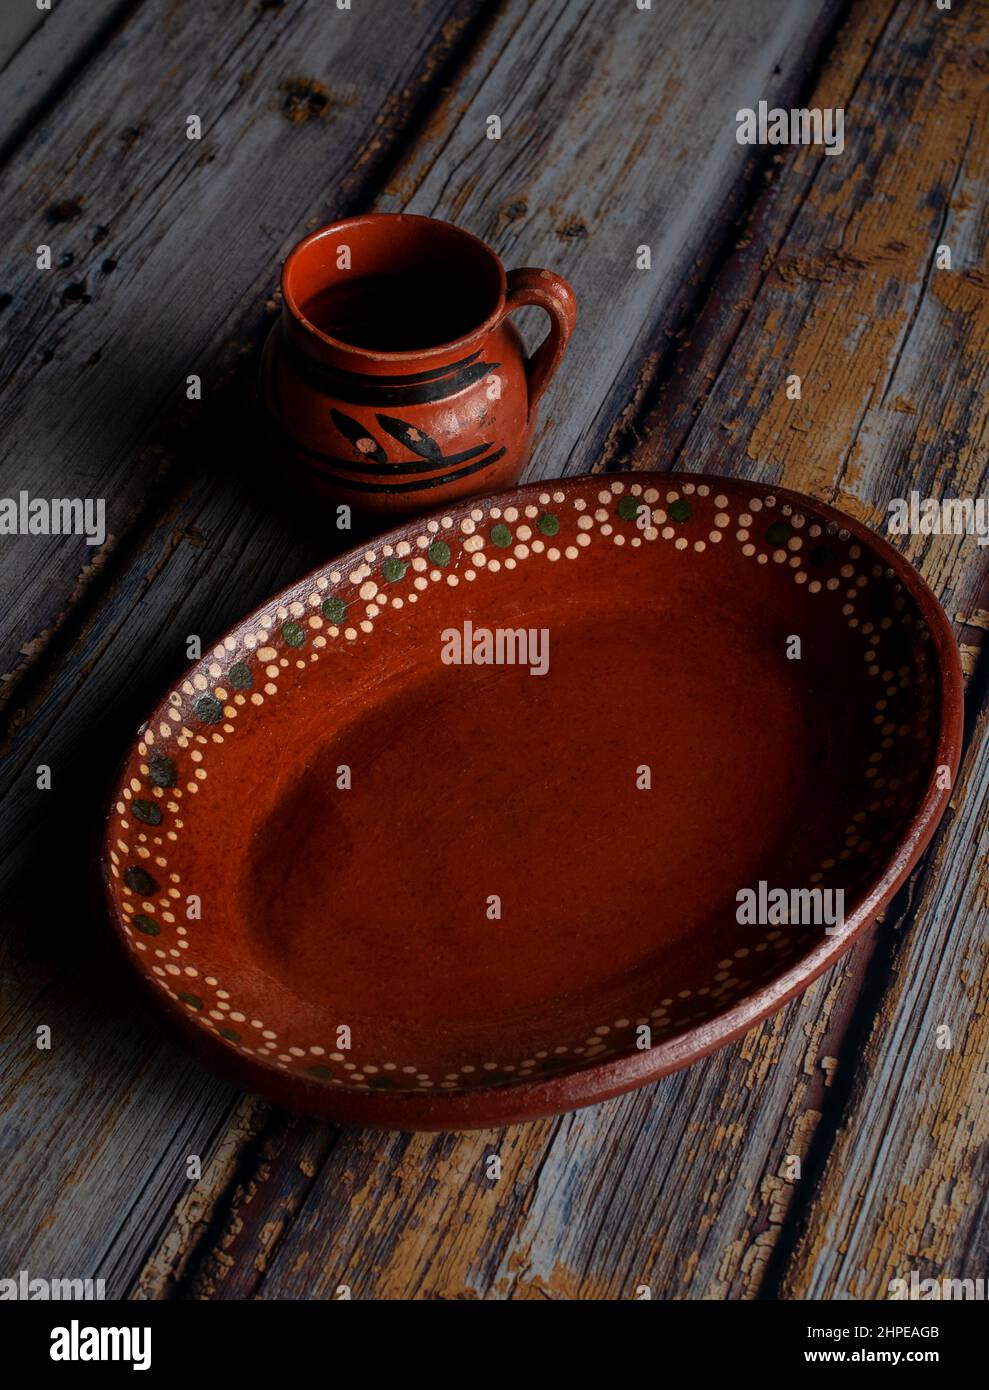 Mexican plates made of mud or clay on a rustic wooden table Stock Photo -  Alamy